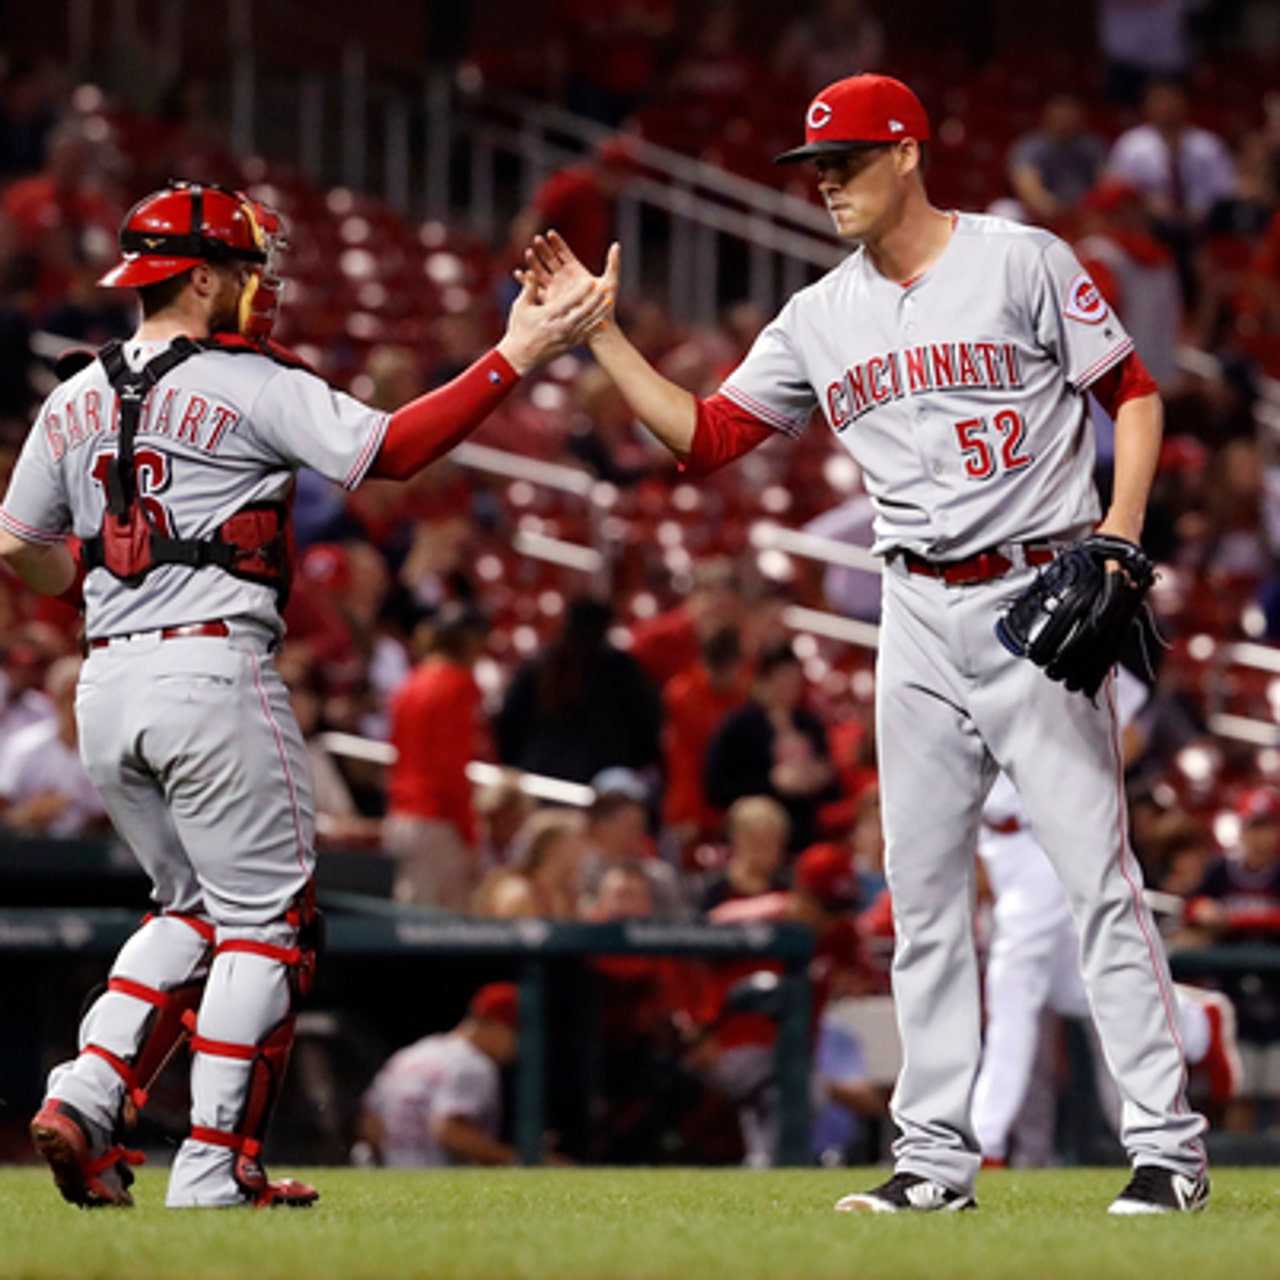 Reds get grand slam from Eugenio Suarez, back Tyler Mahle to